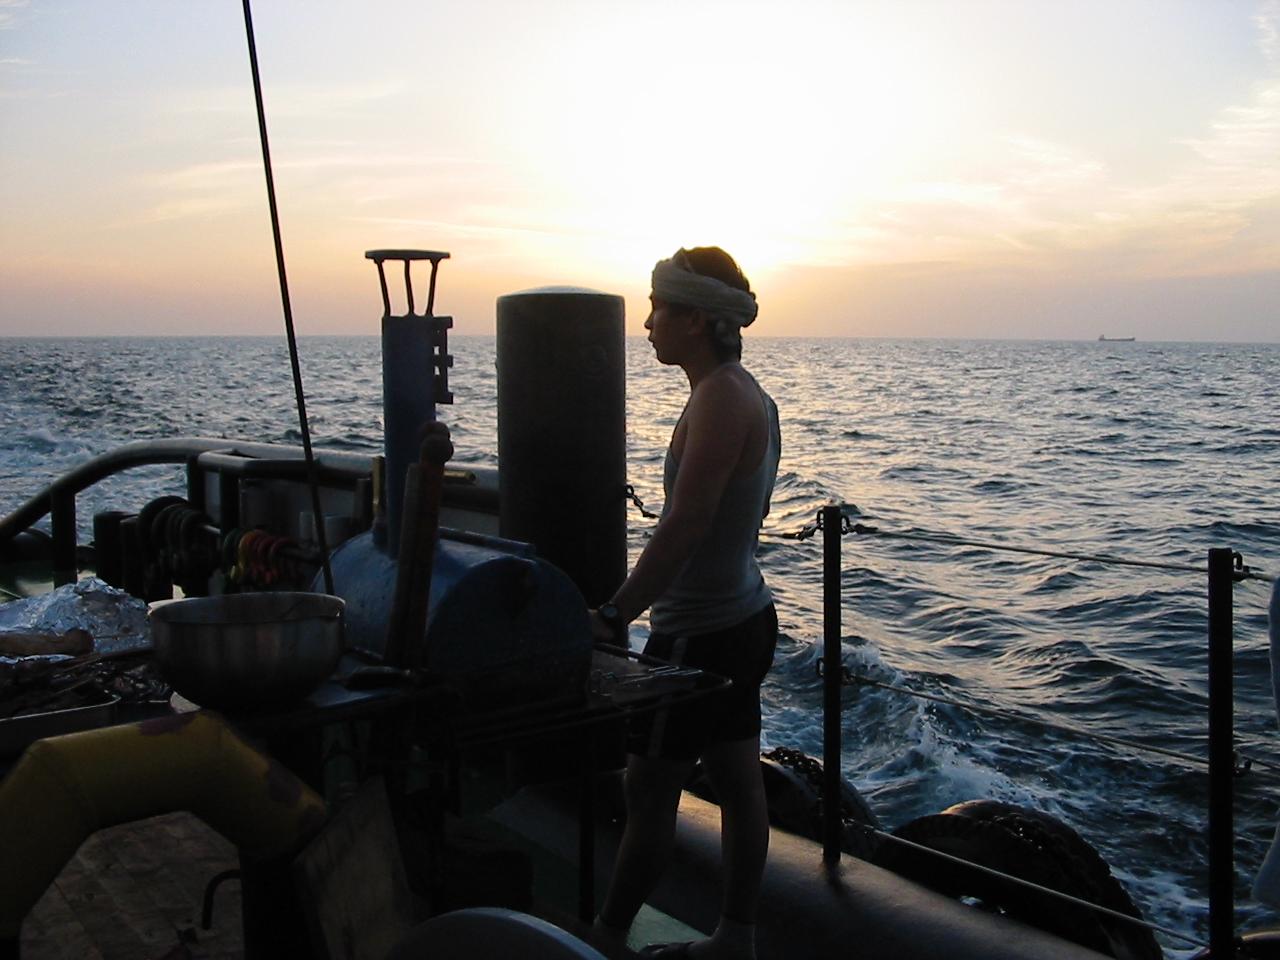 Seafarer looking out at sea